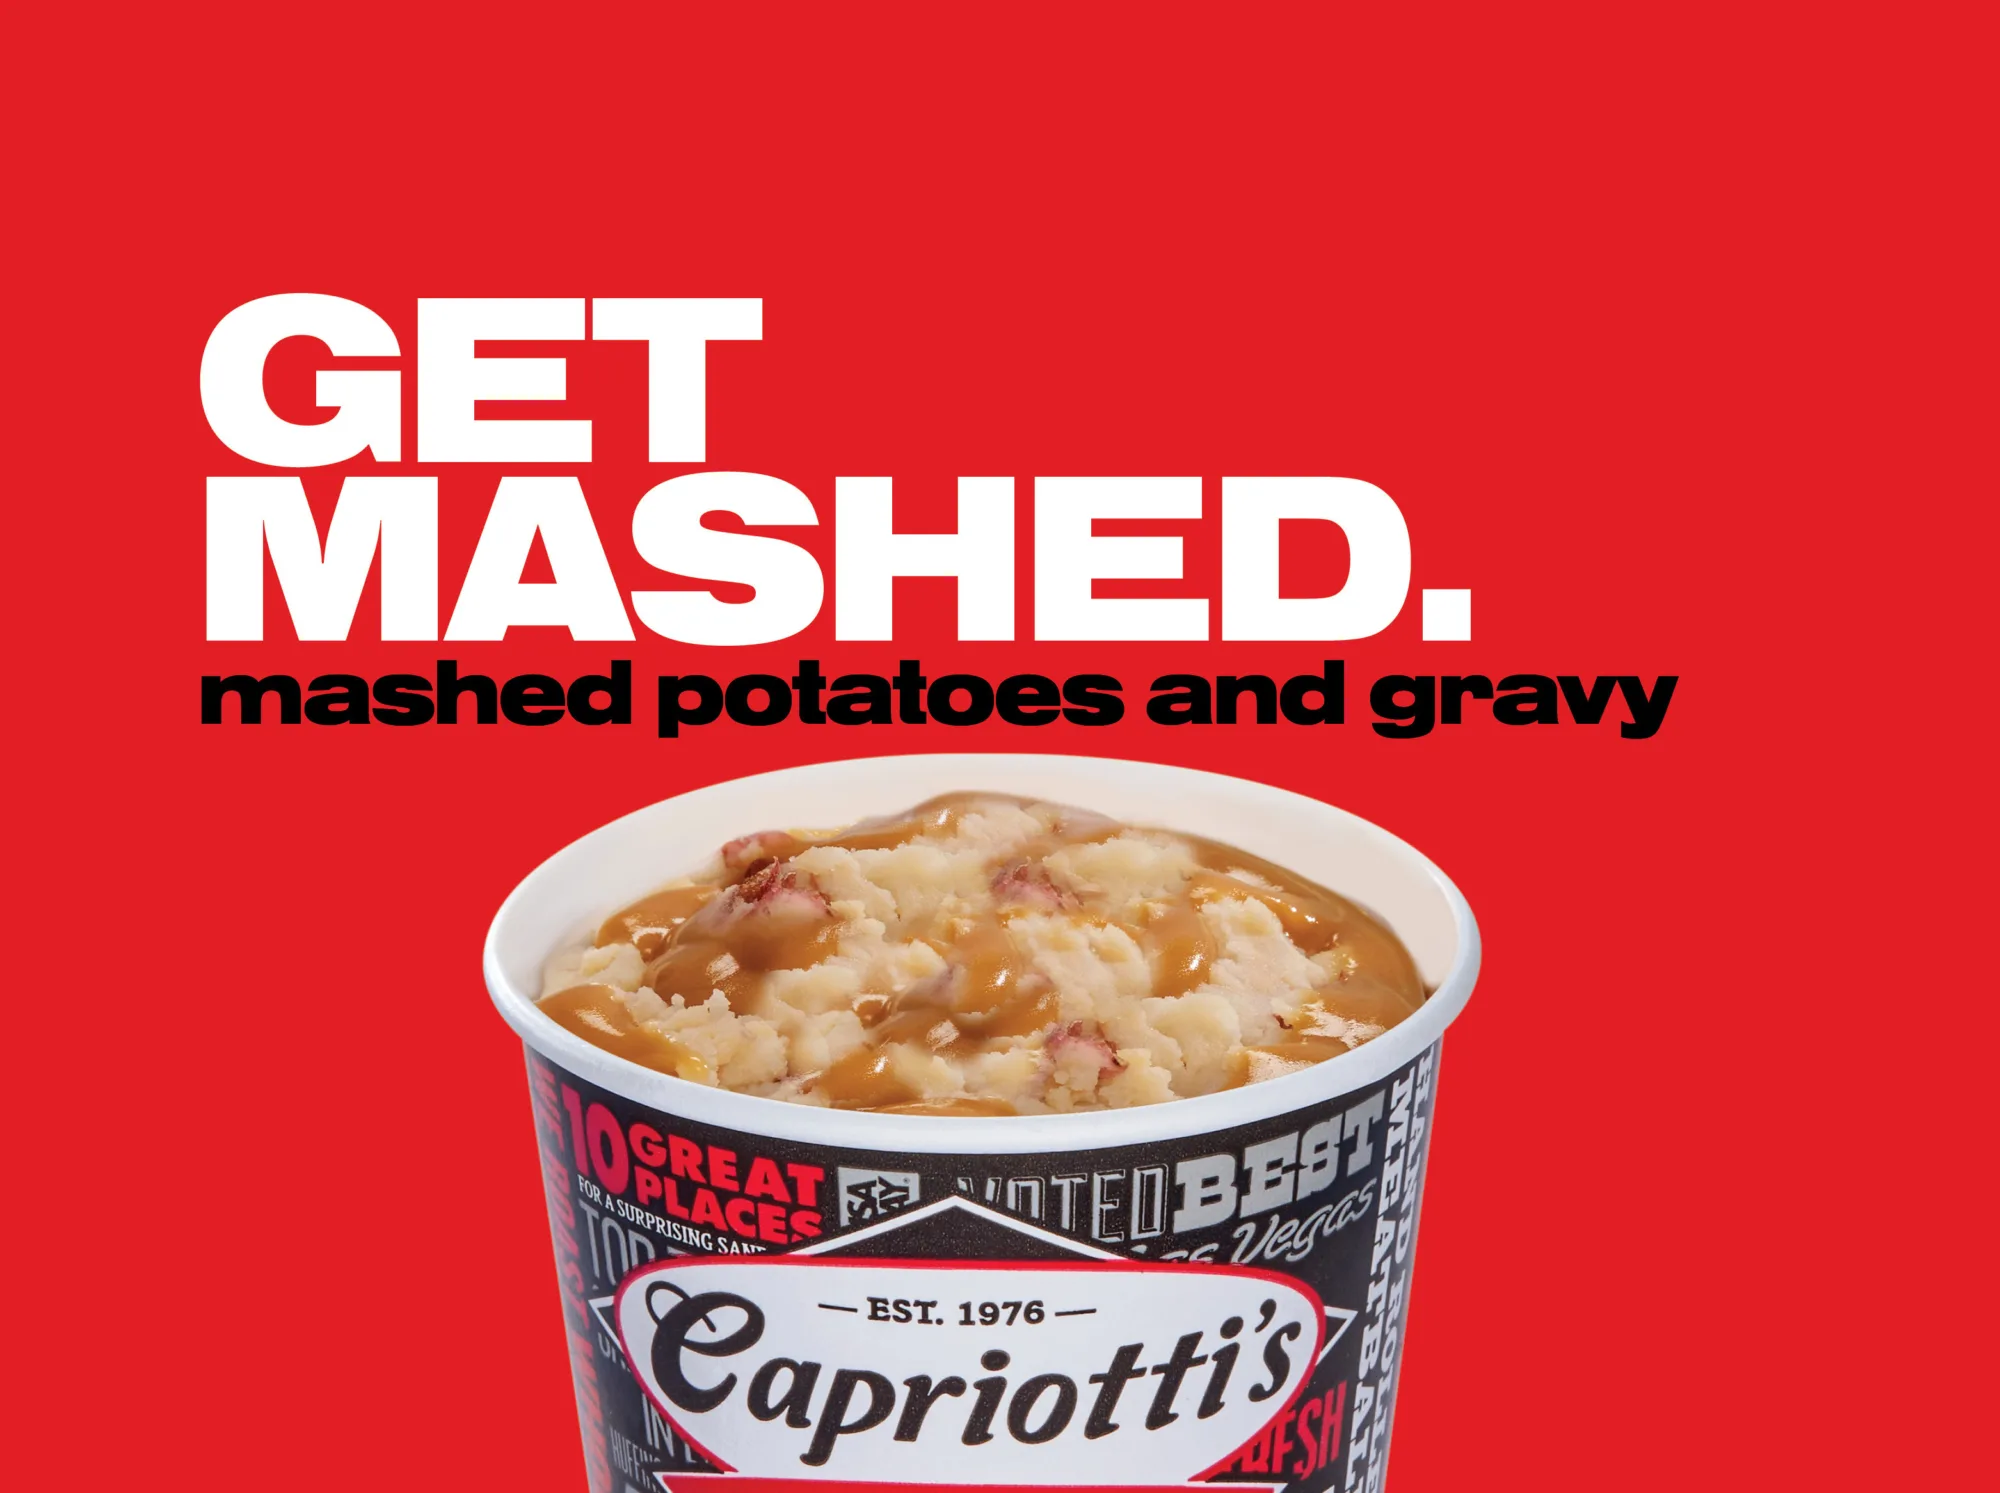 Get mashed with mashed potatoes and gravy